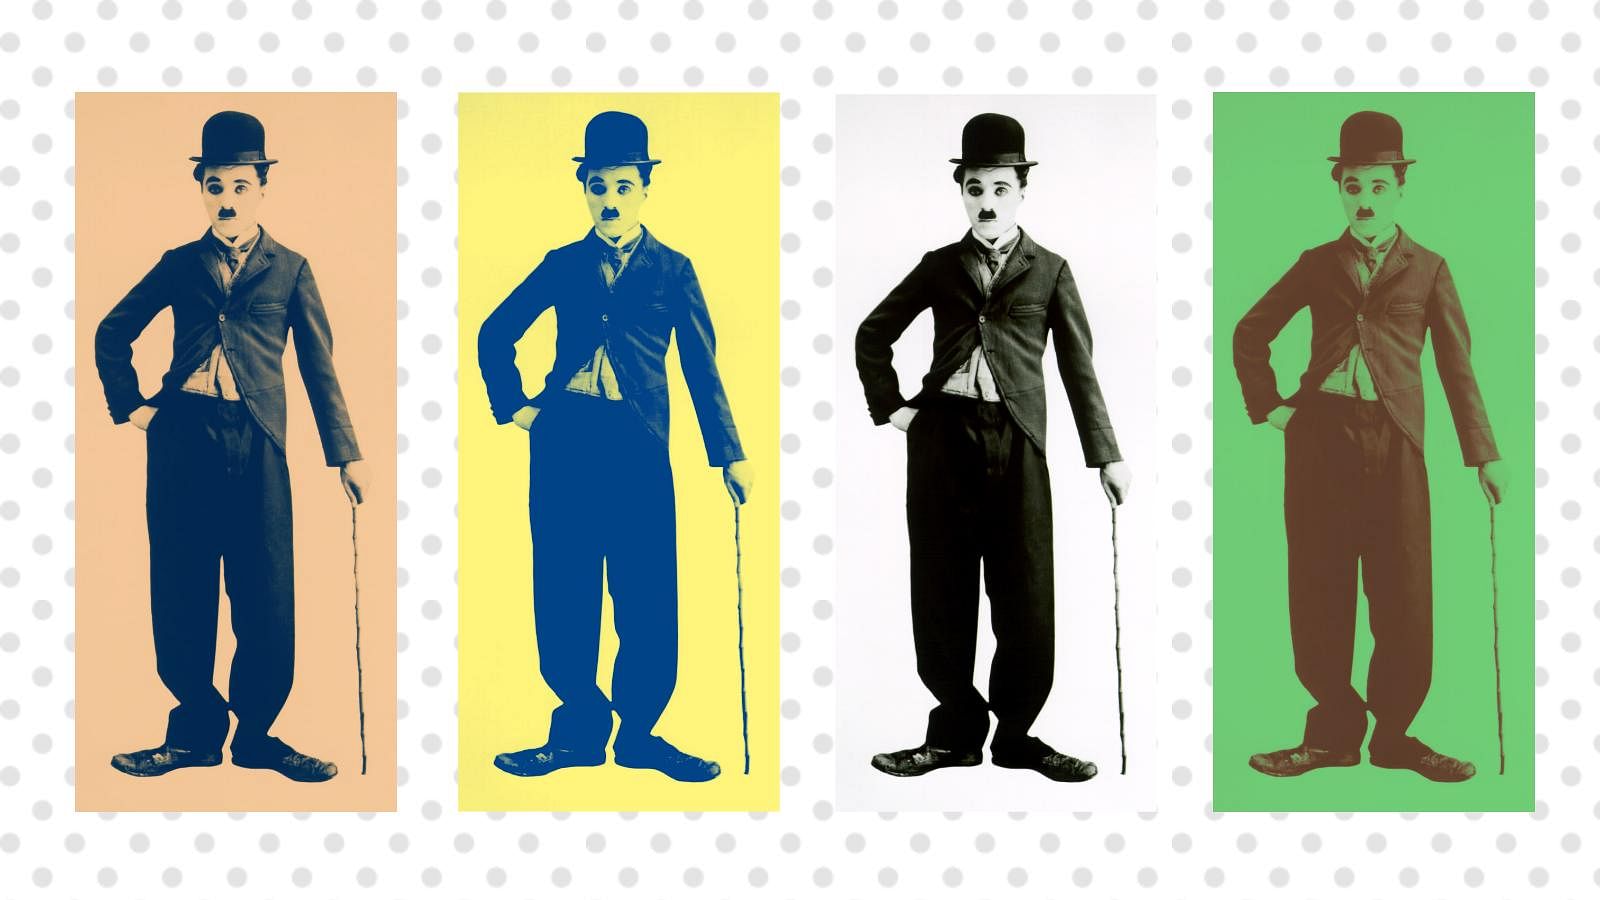 Charlie Chaplin lives on in the Indian psyche as the ultimate comic.